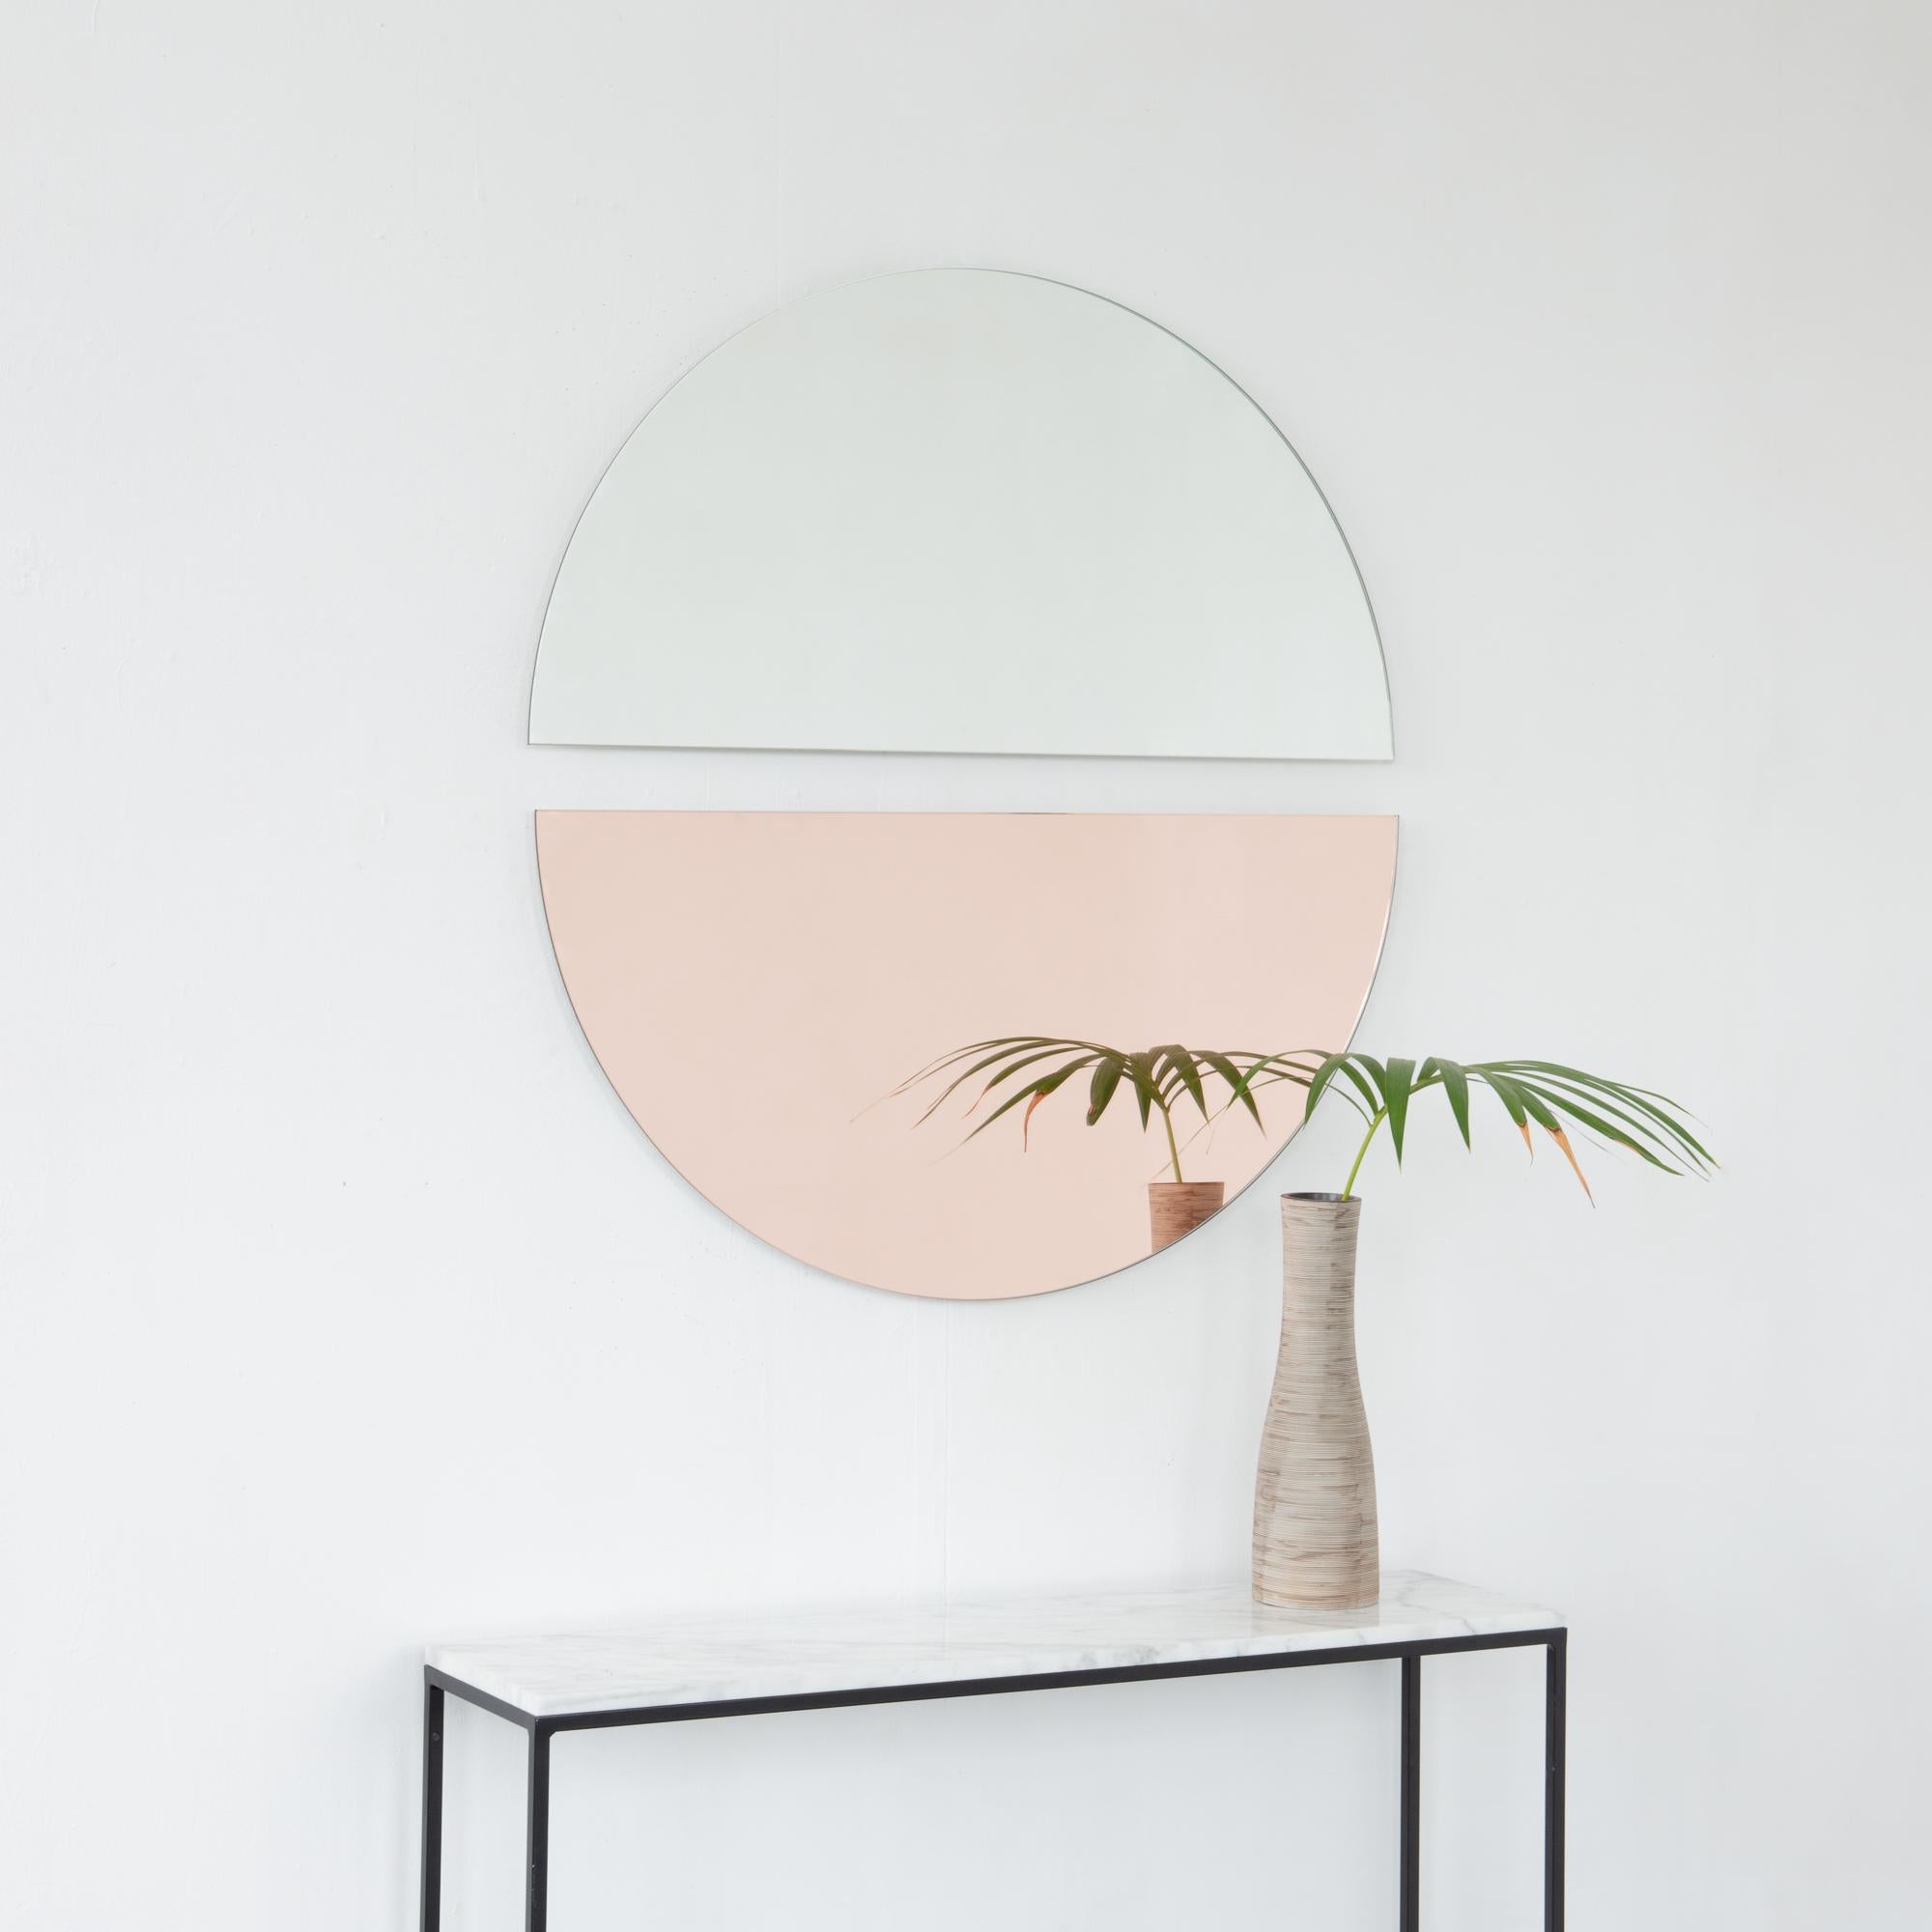 Set of two charming and minimalist rose gold (peach) and standard silver half-moon Luna™ frameless mirrors with a floating effect. Fitted with a quality and ingenious hanging system for a flexible installation in 4 different directions. Designed and